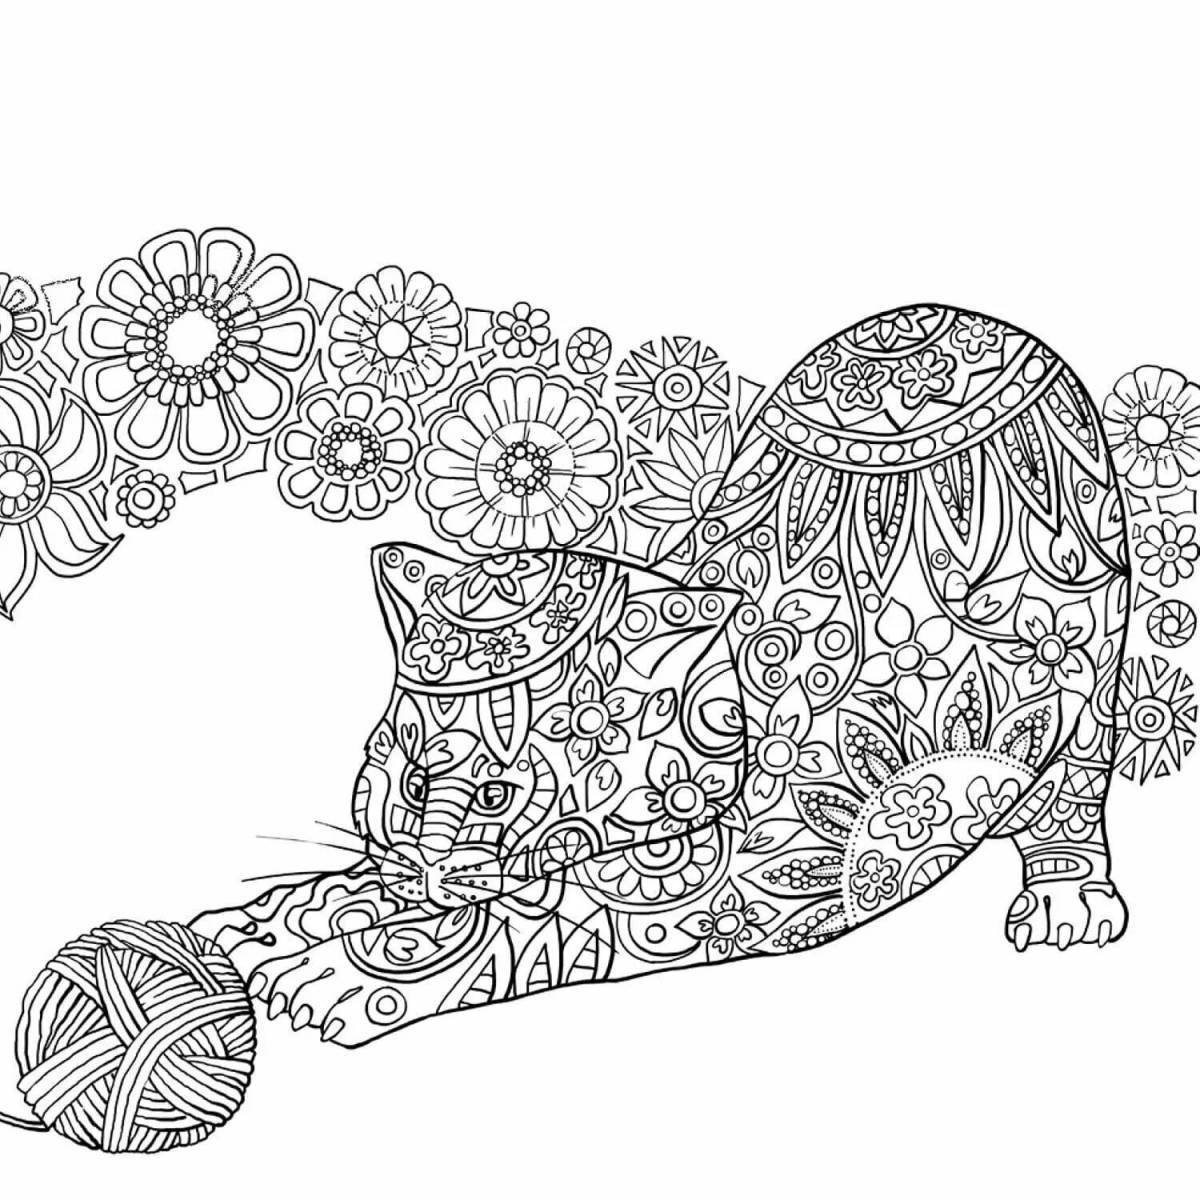 Unforgettable coloring book is the best in the world